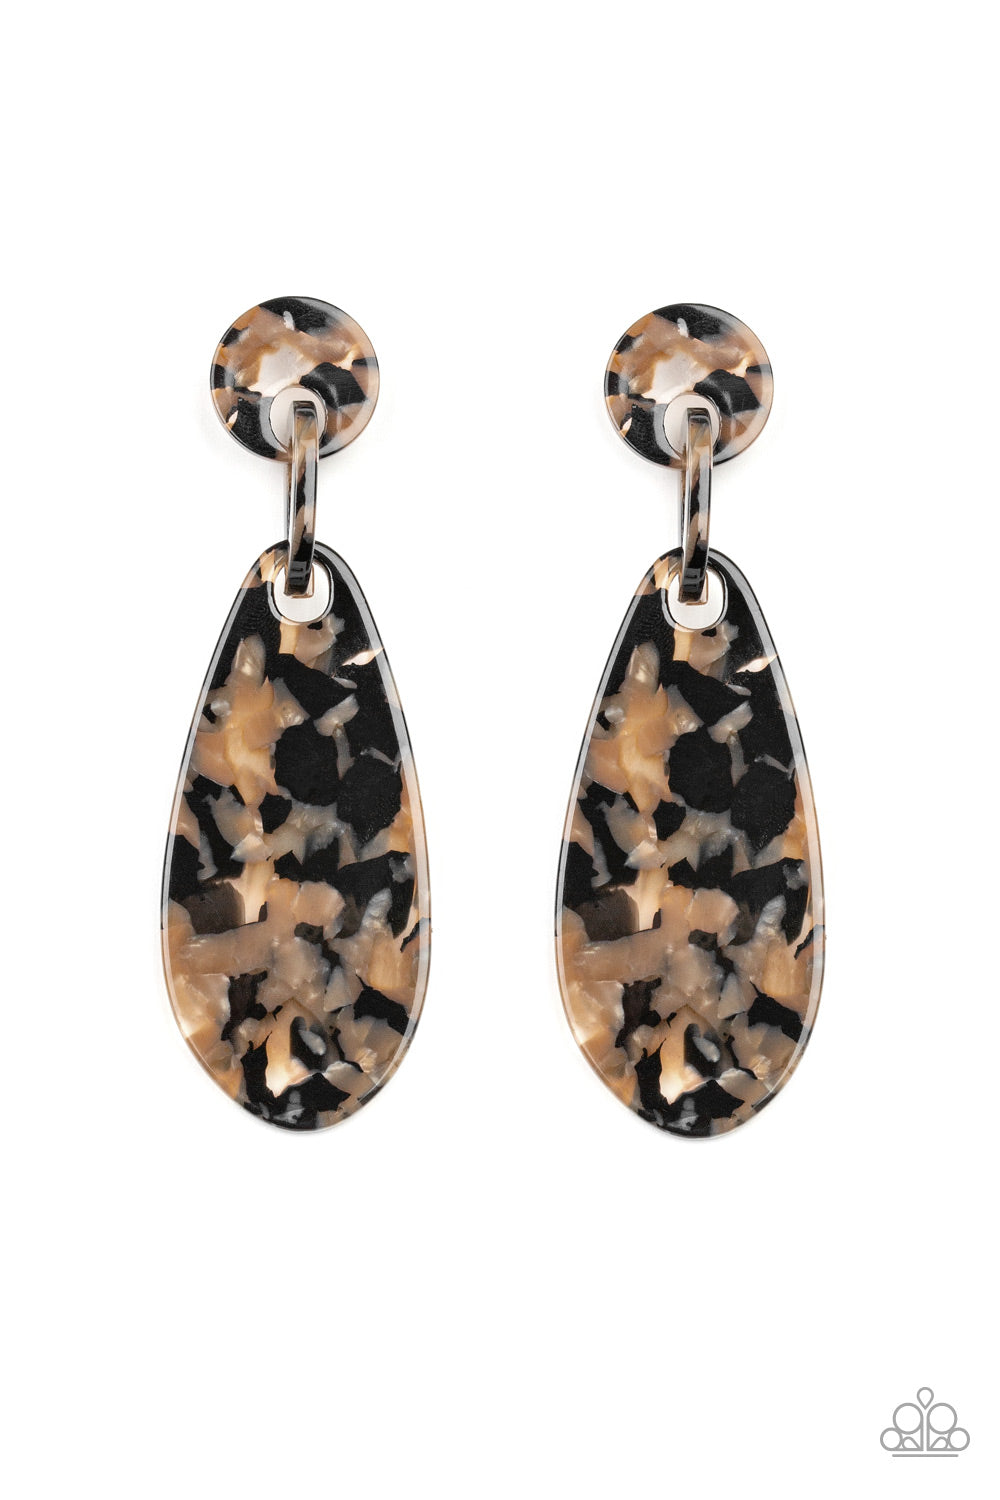 Paparazzi Accessories A HAUTE Commodity - Black Earrings - Lady T Accessories